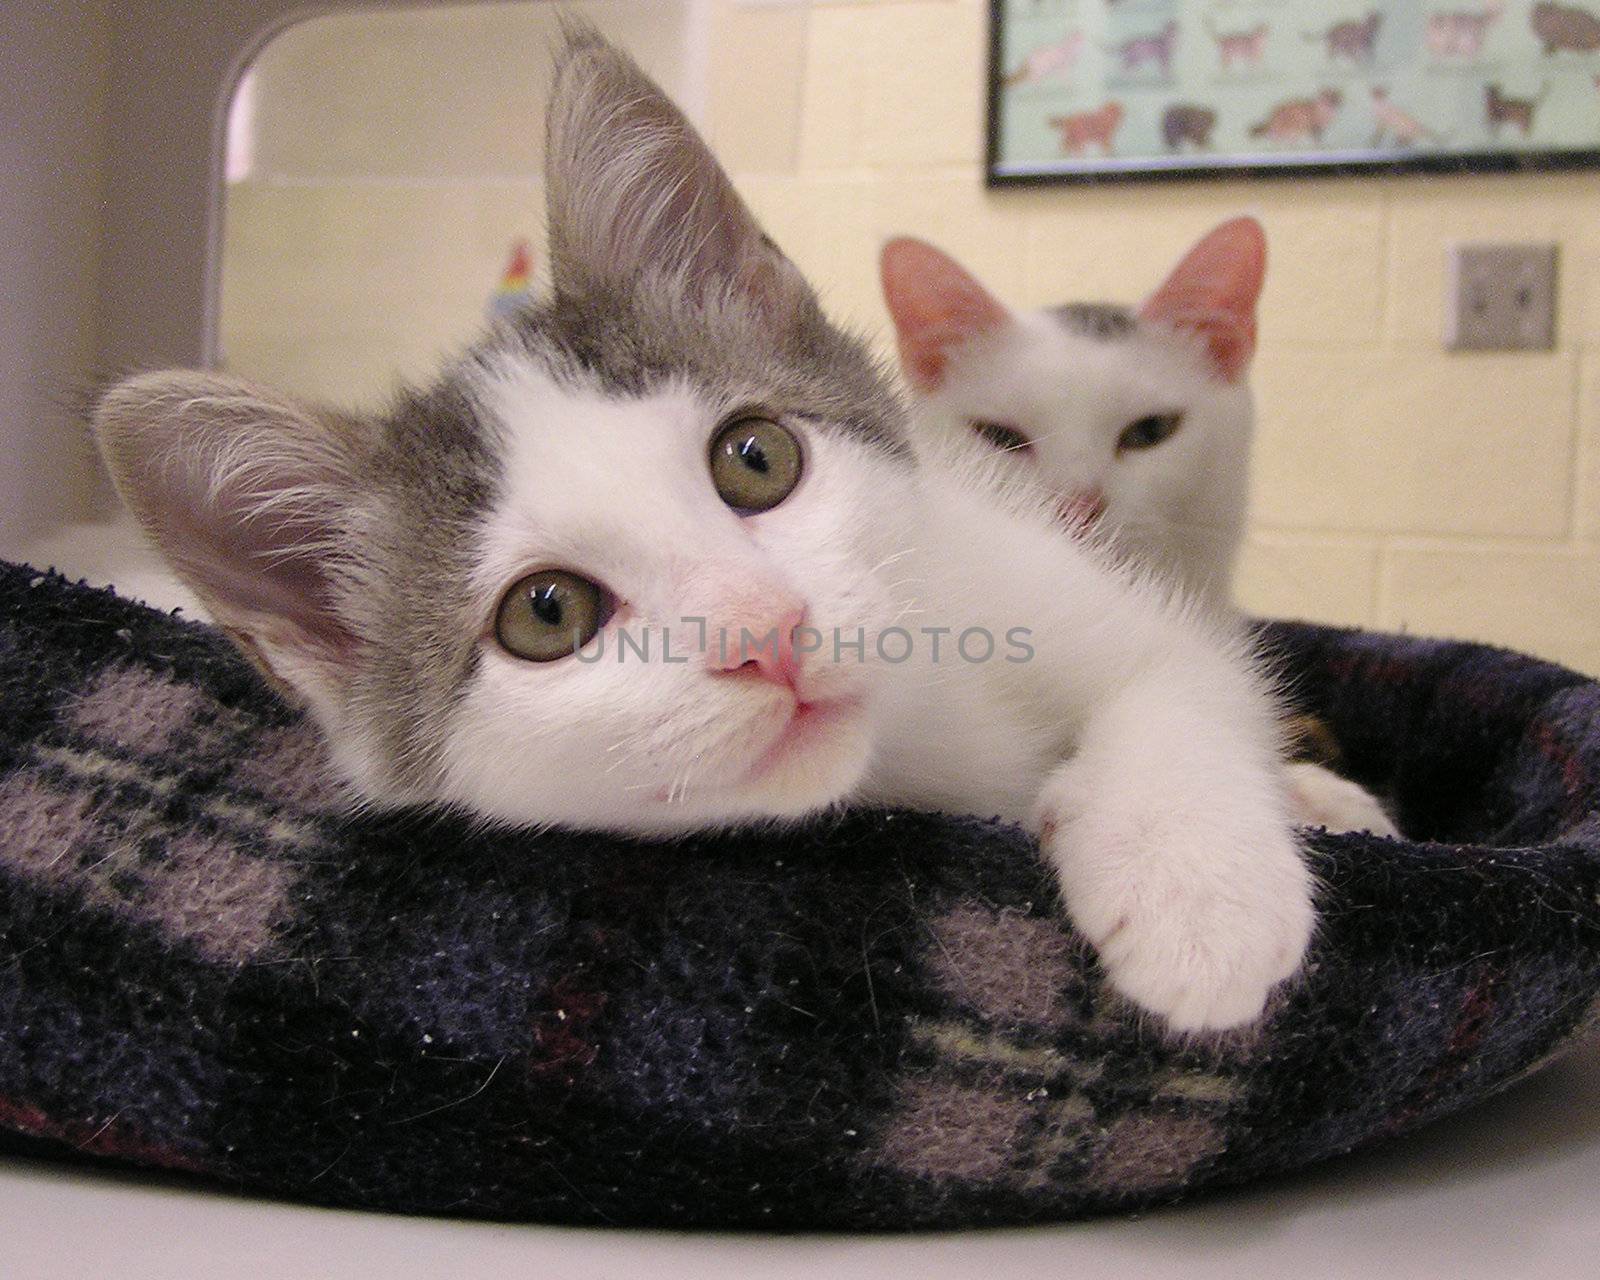 Two kittens at shelter by nalaphoto